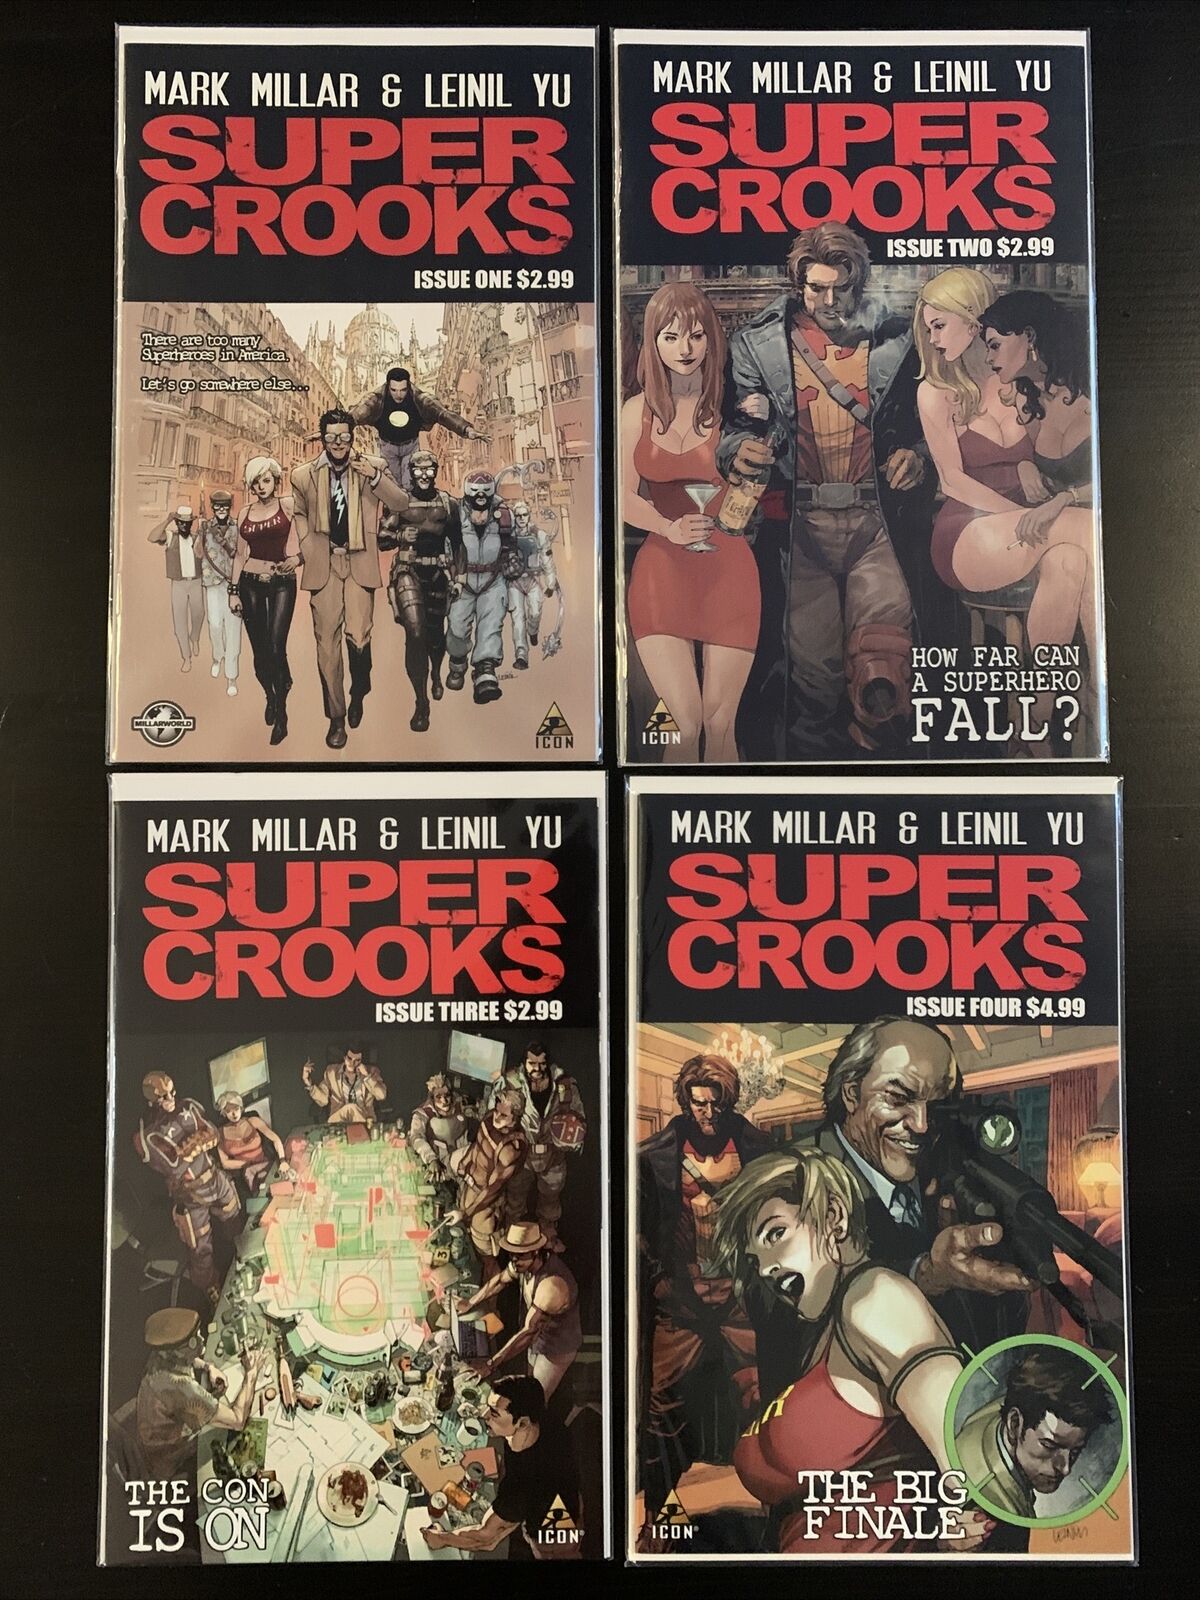 Super Crooks #1-4 NM thru FN 2012 Icon Mark Millar | Combined Shipping Available